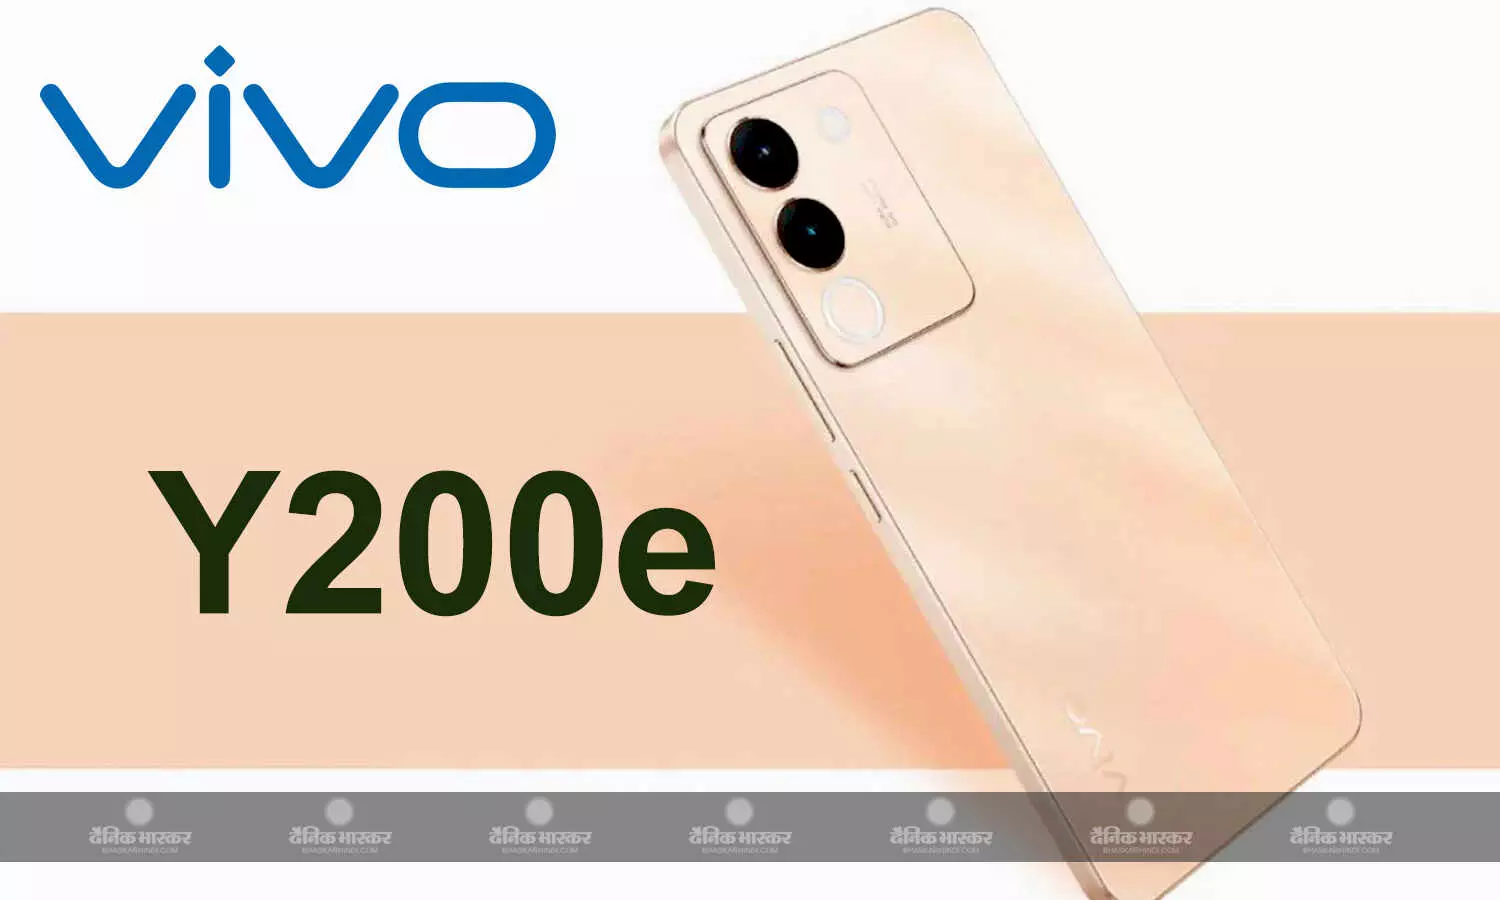 vivo-y200e-5g-launching-date-this-amazing-smartphone-of-vivo-is-going-to-make-a-splash-in-the-indian-market-soon